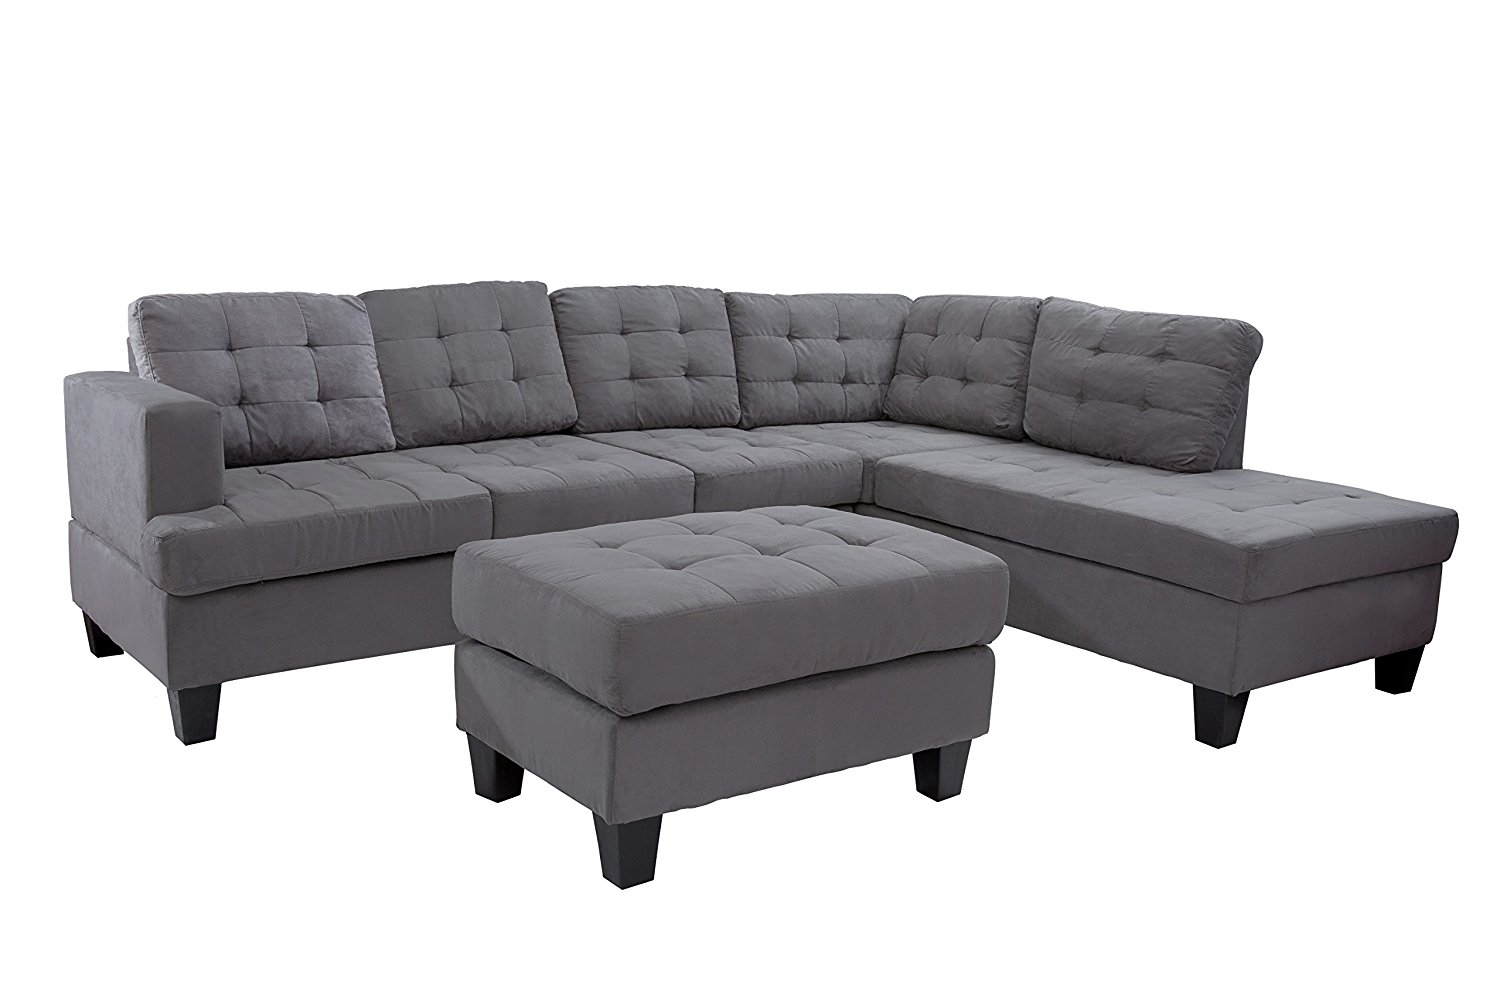 Merax 3-piece Reversible Sectional Sofa with Chaise and Ottoman, Suede Fabric / 6 pillows / Wooden Legs, Grey (Grey)